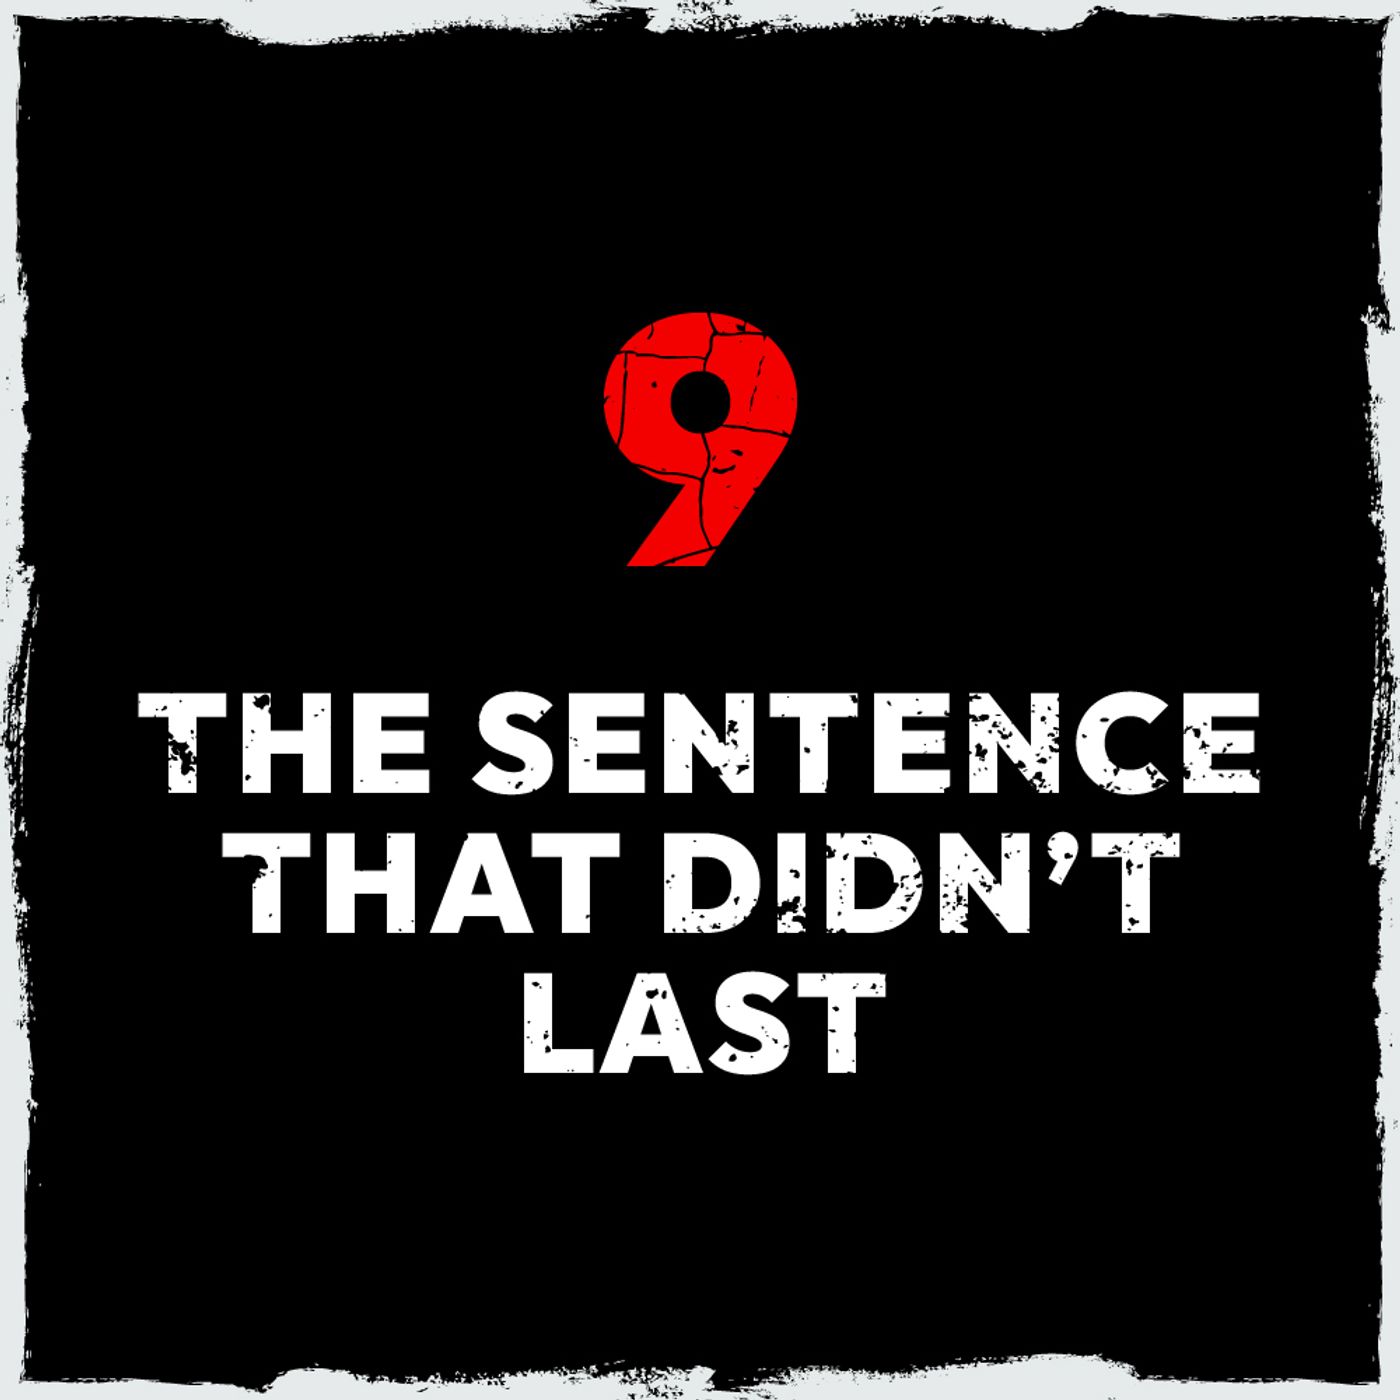 9: Episode 9: The sentence that didn’t last